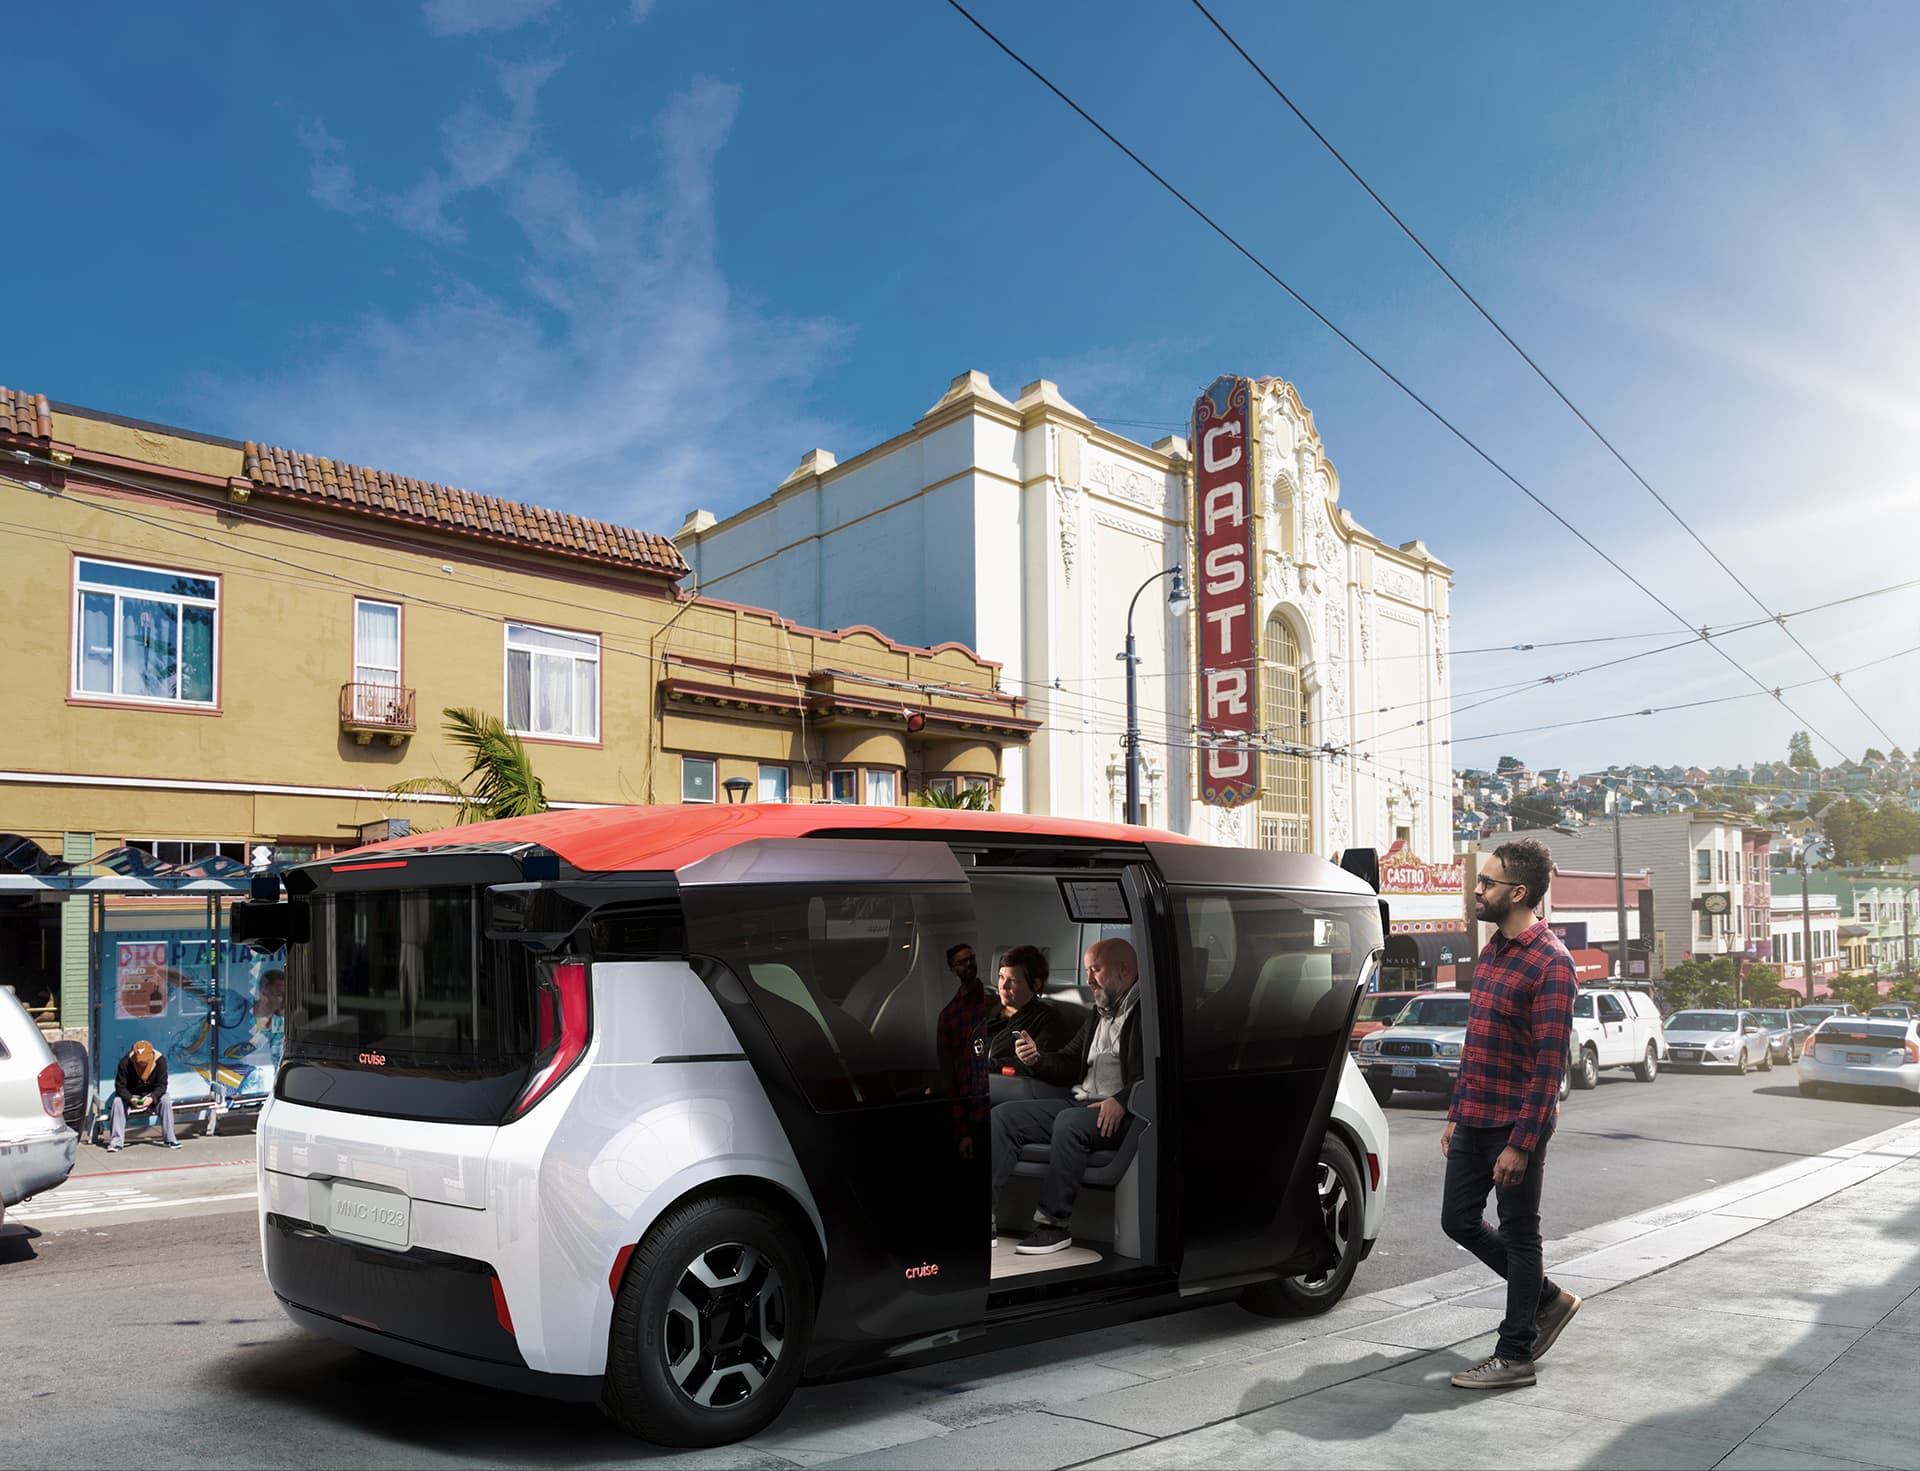 GM-backed Cruise seeks final approval to commercialize robotaxis in San Francisco Auto Recent